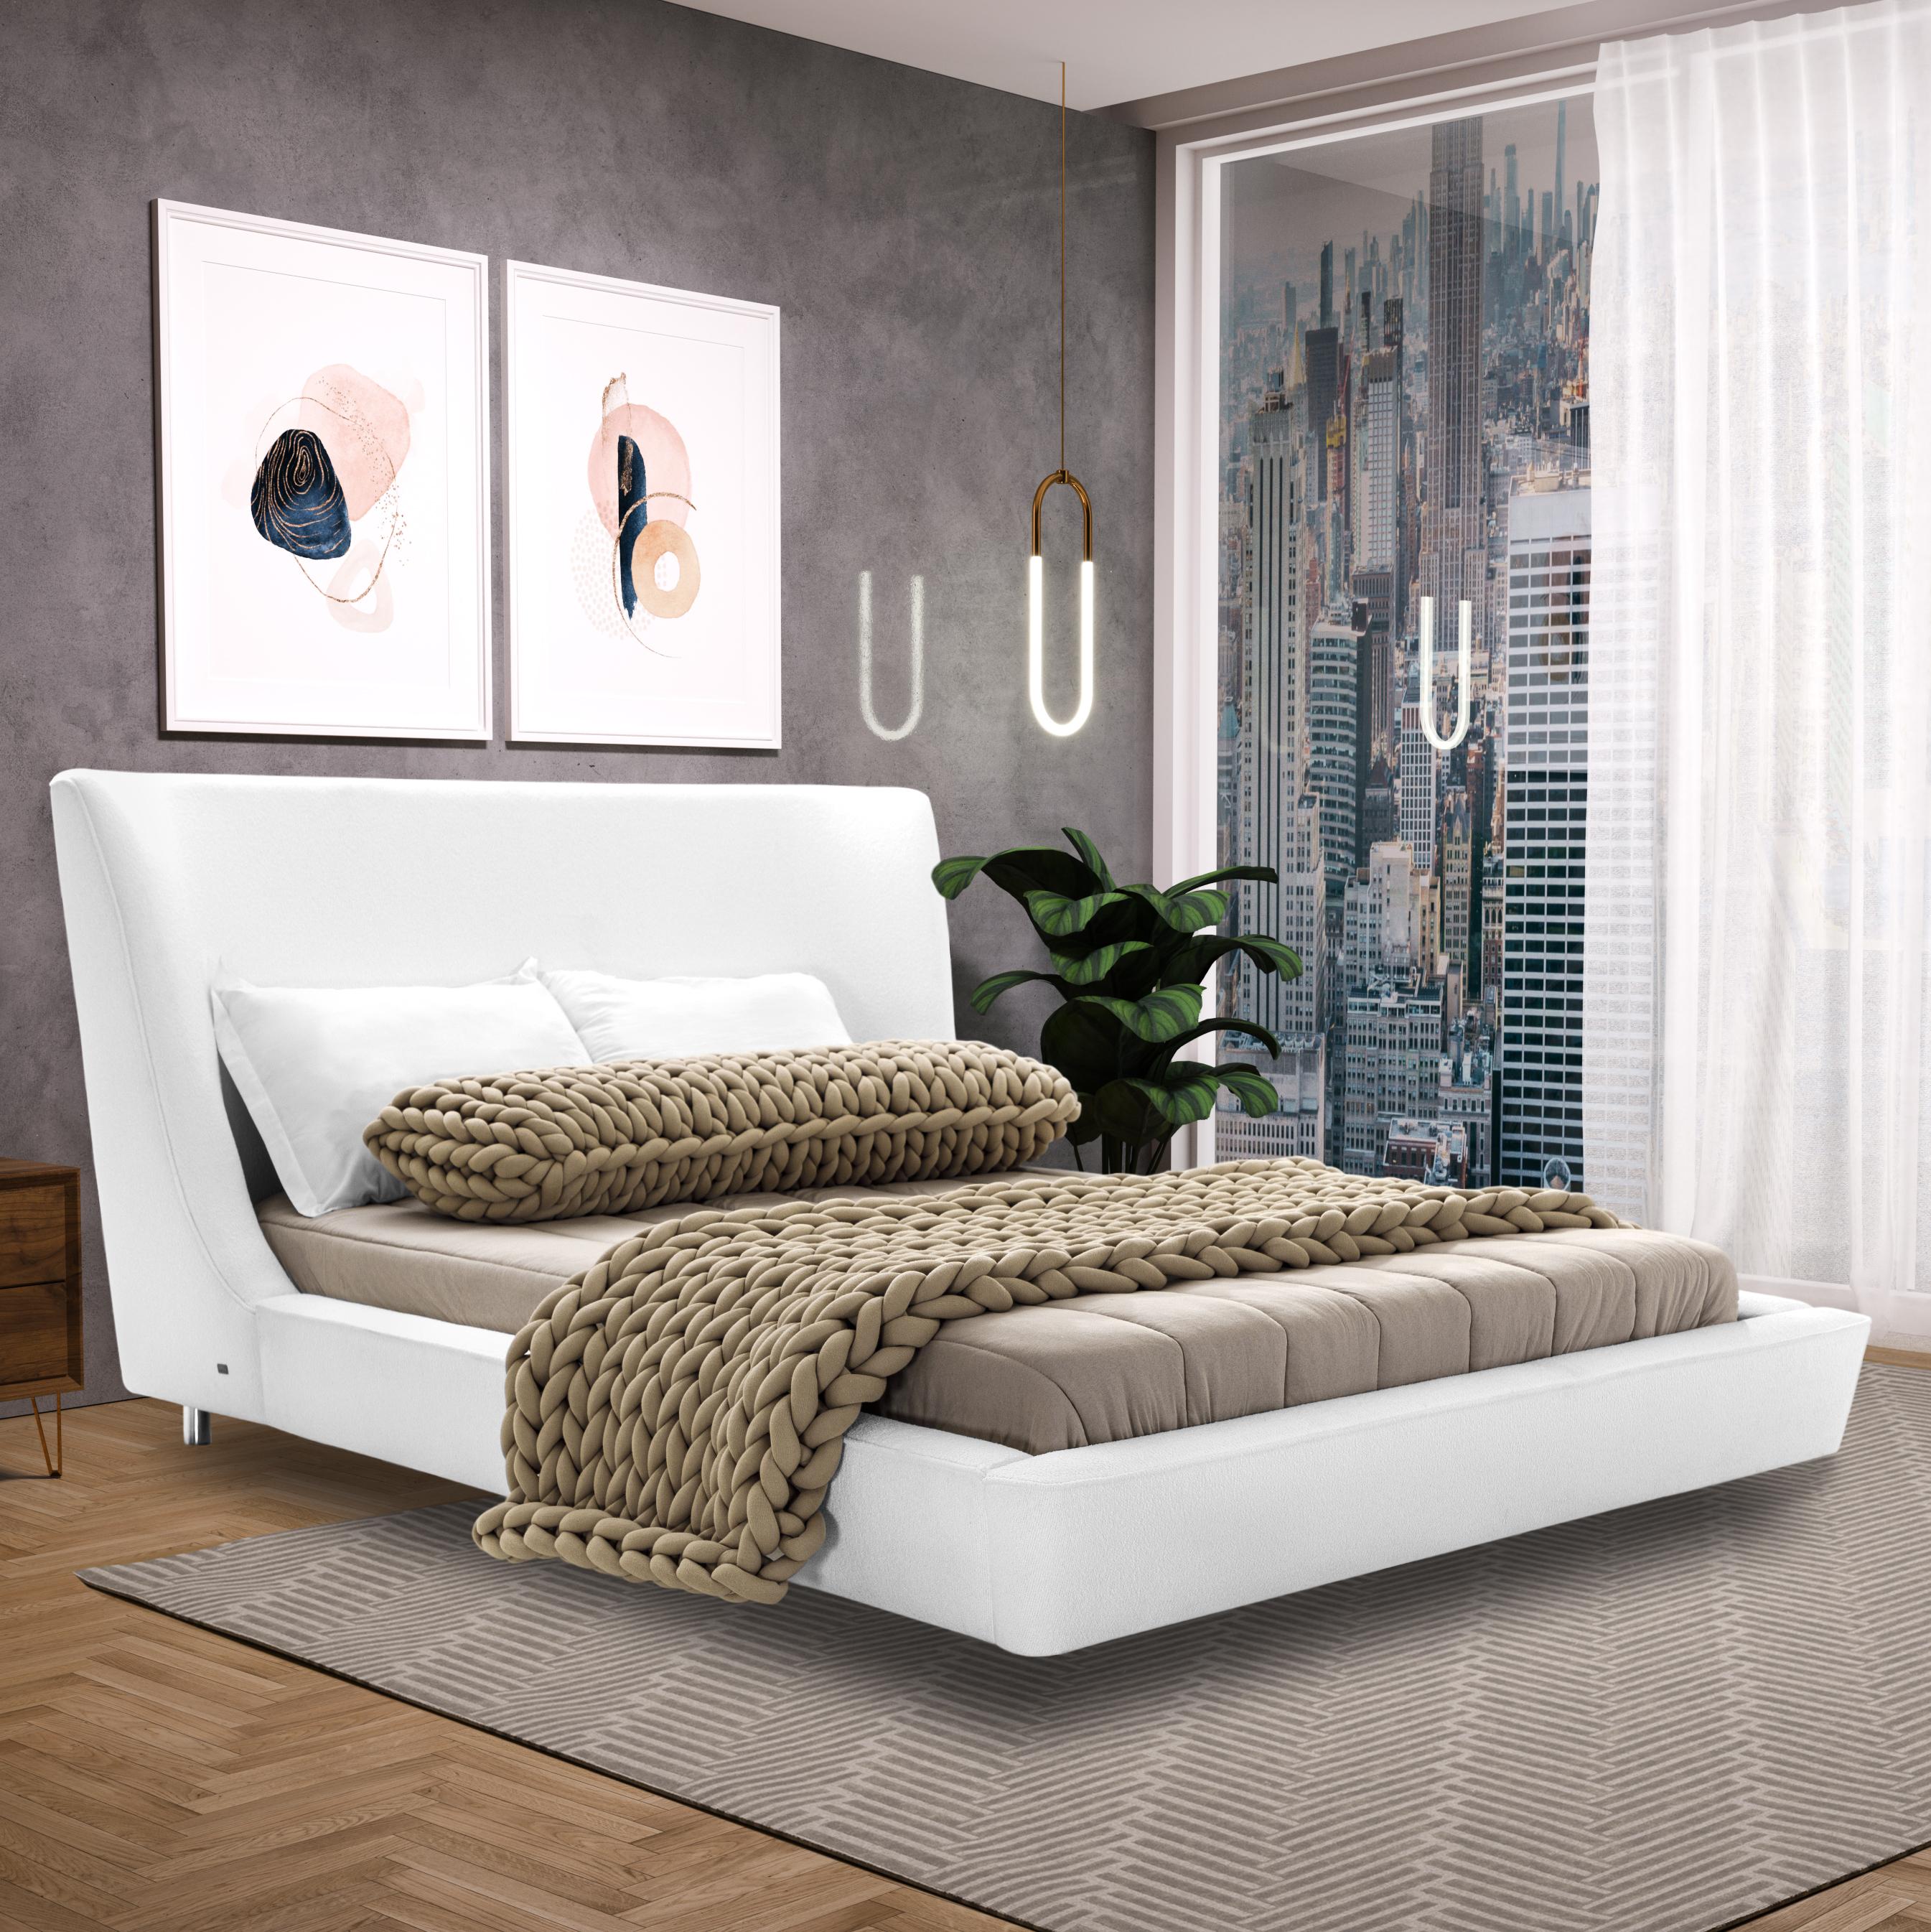 The amazing designers from the Uultis team have fabricated this beautiful Musa queen bed in a white fabric with a shell shape as a headboard that is supported by an angular frame, covered with foam and fabric. This is a sophisticated and cozy bed